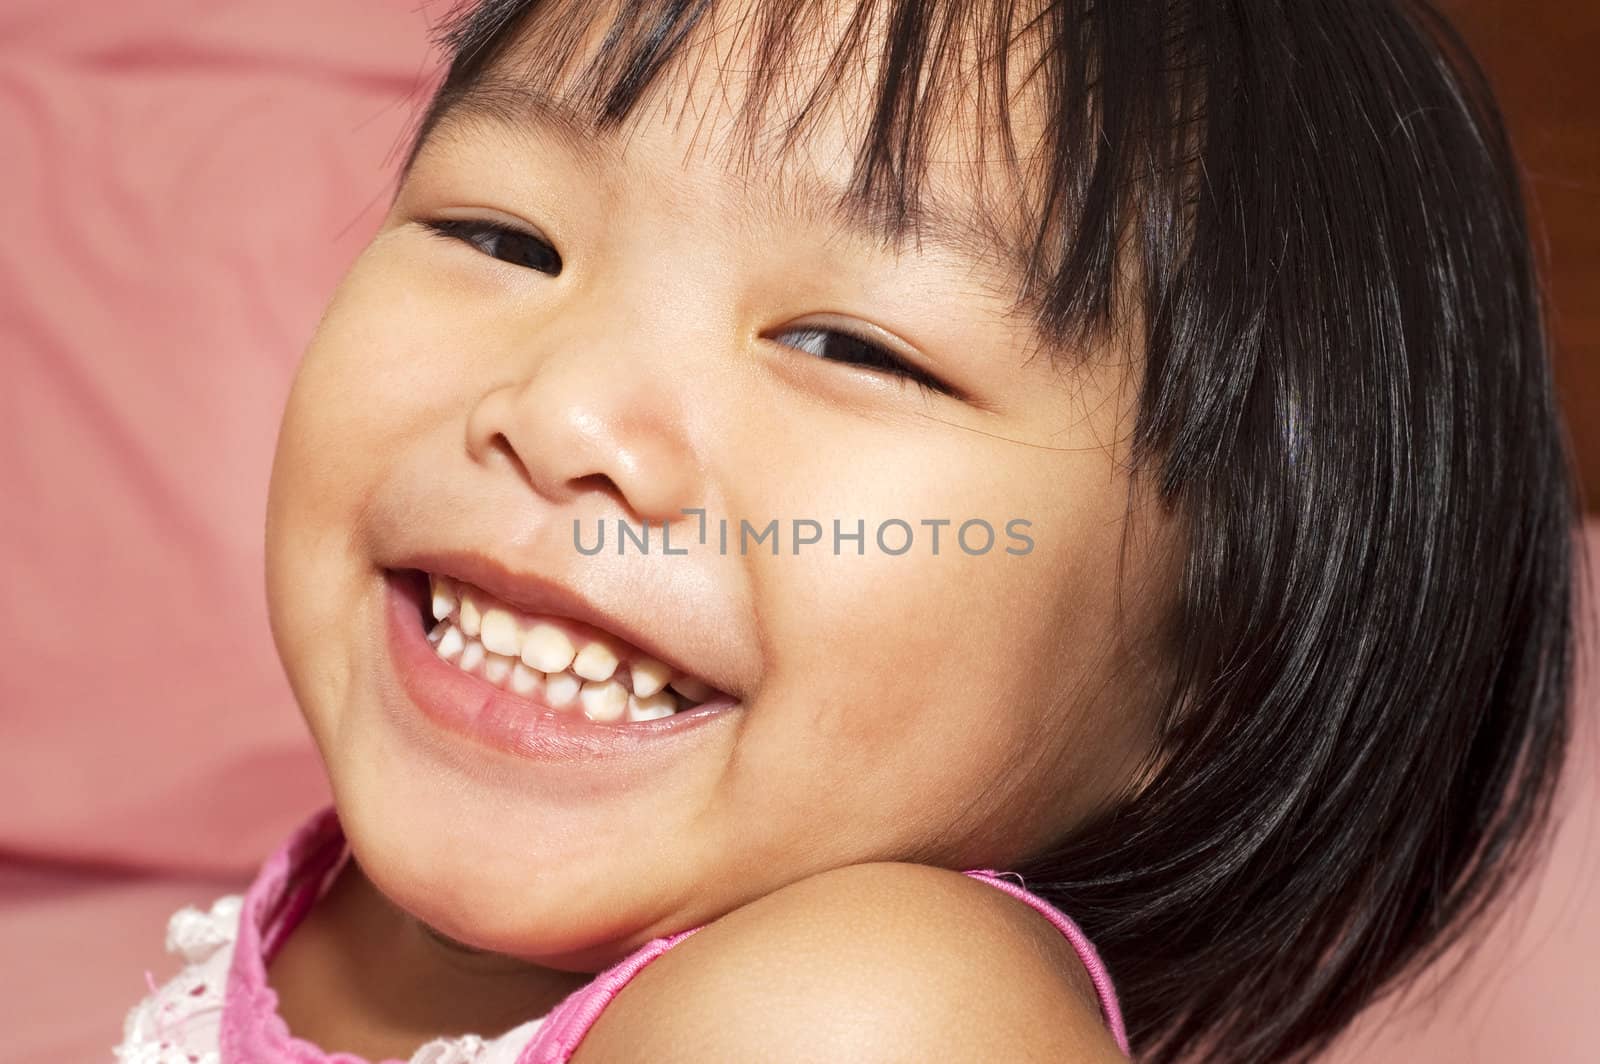 Close-up shot of a young Asian girl with smile on her face.